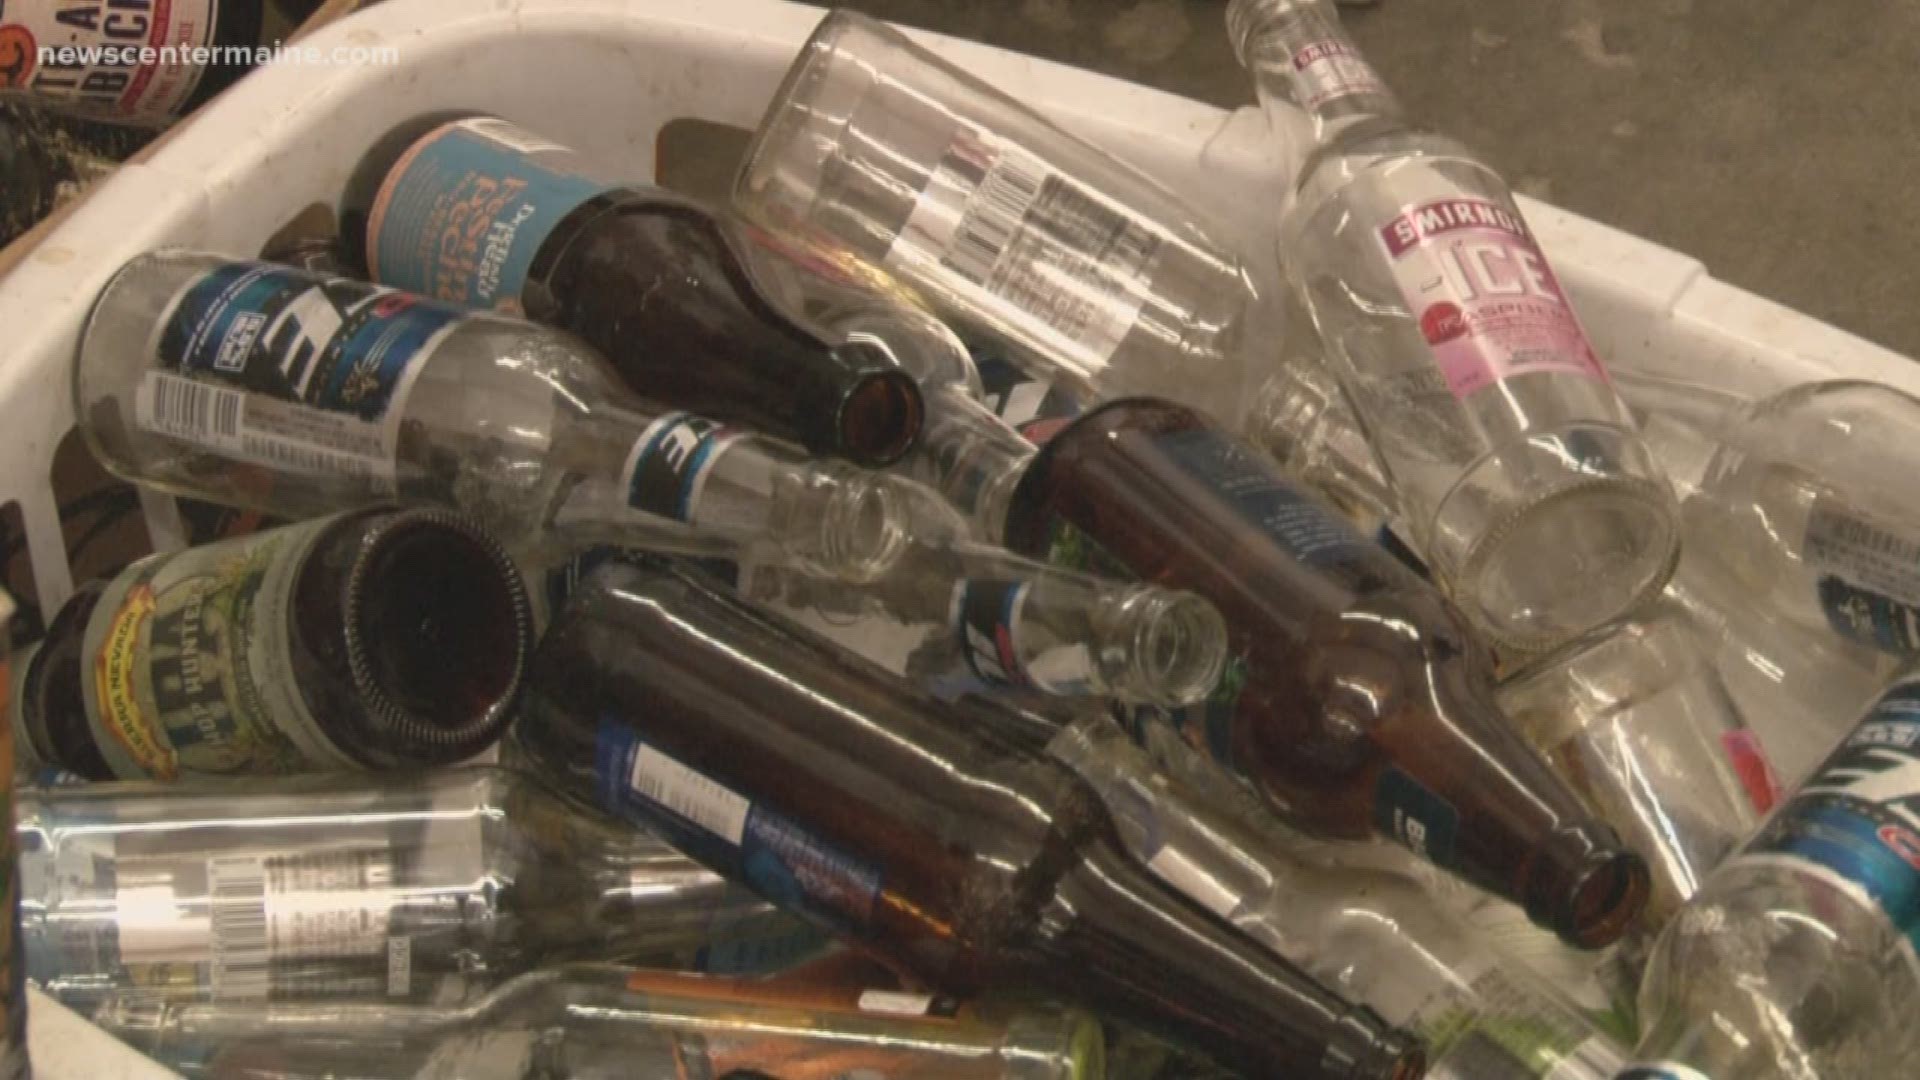 Maine towns struggling to maintain recycling programs